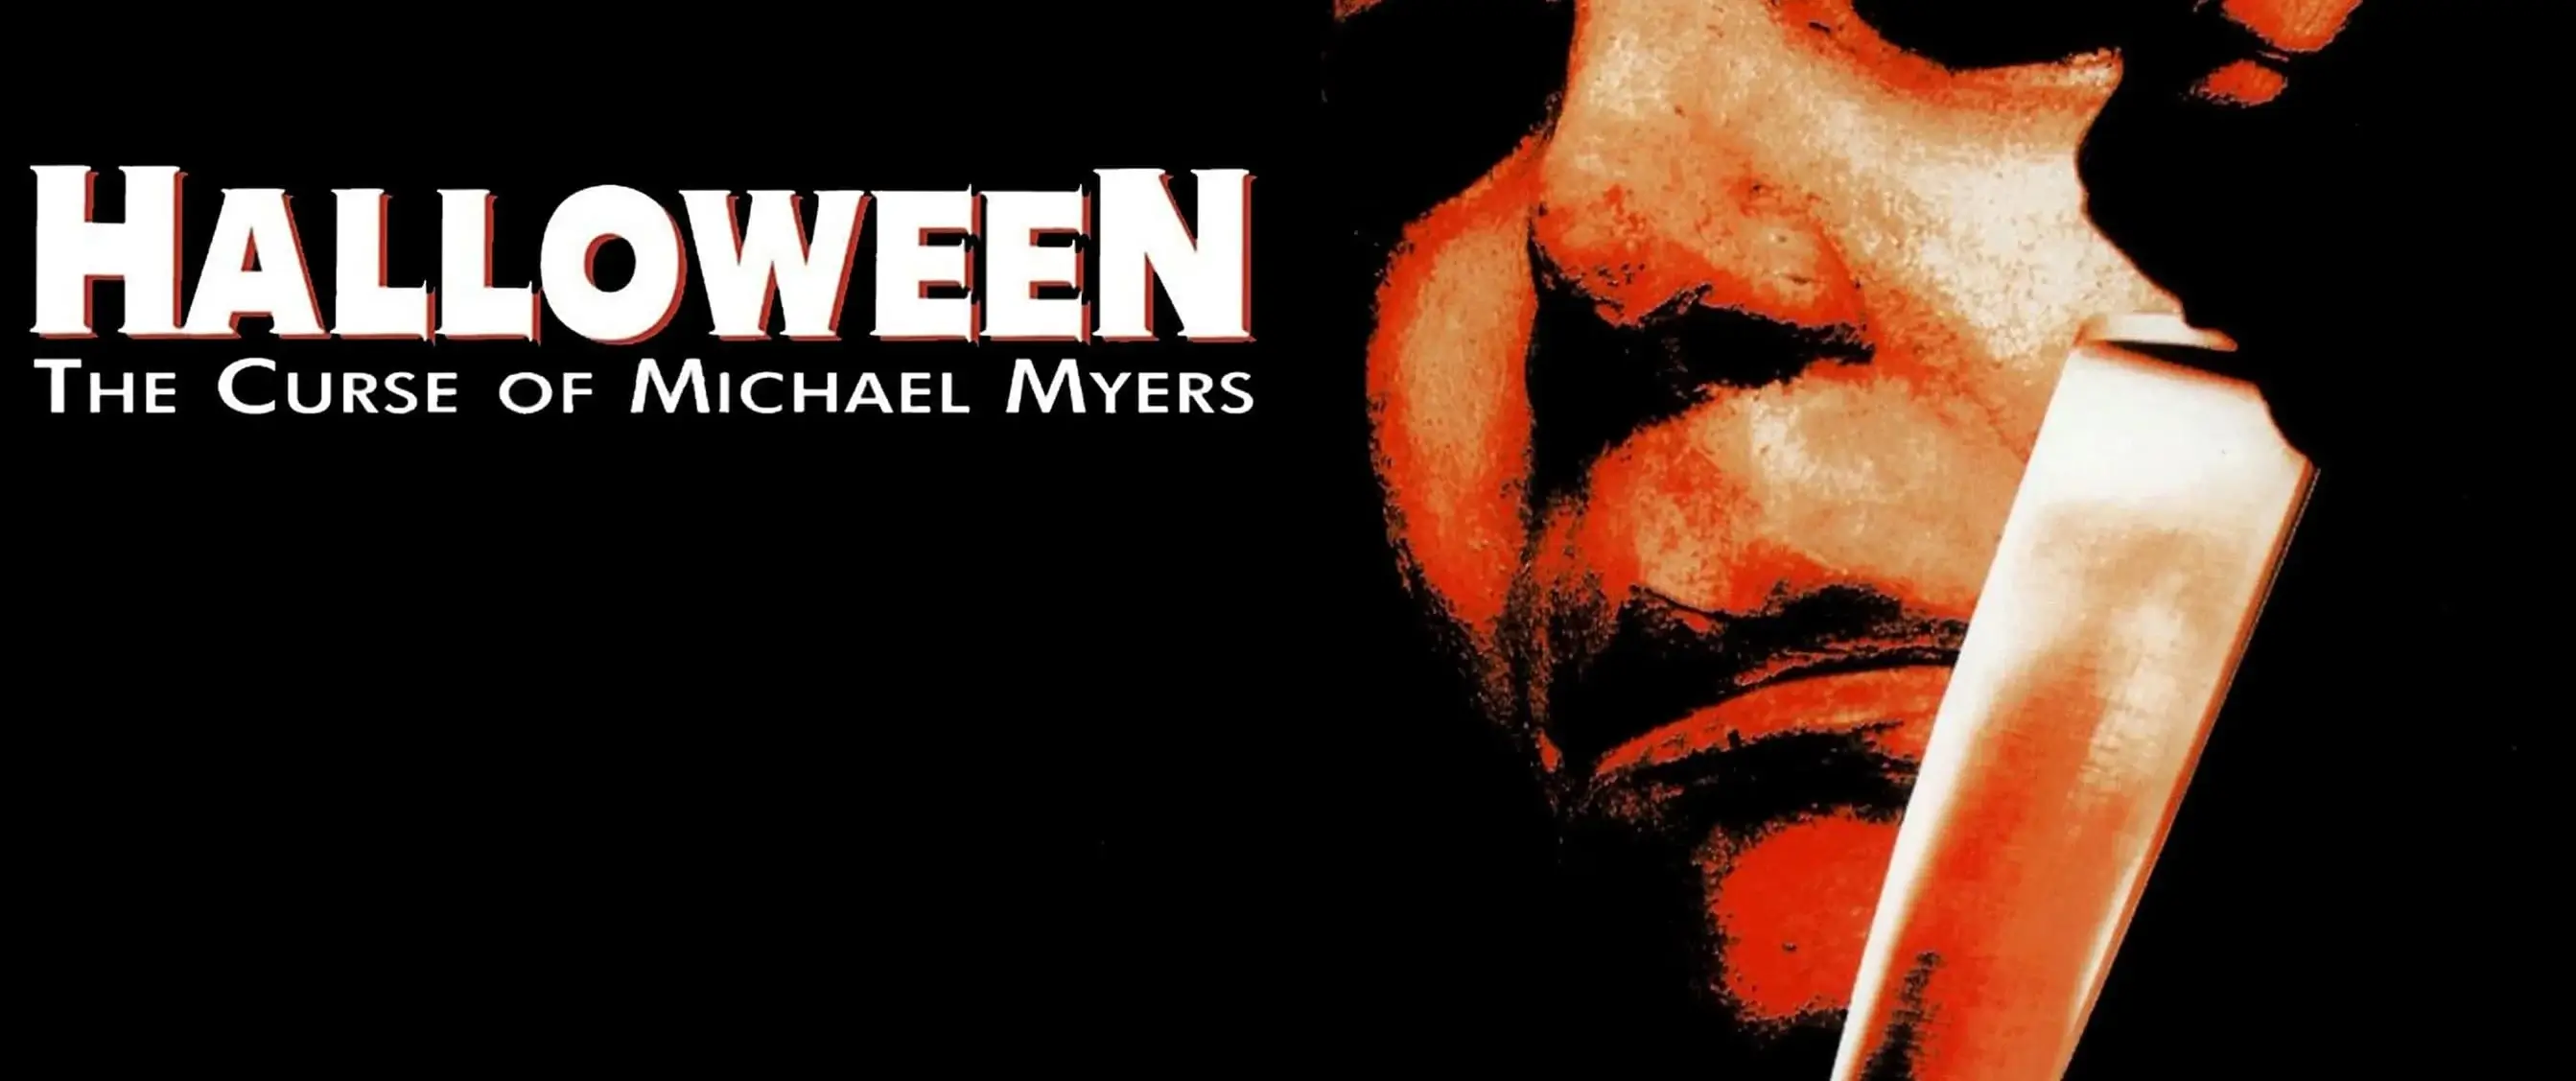 Halloween: The Curse of Michael Myers 4K 1995 big poster